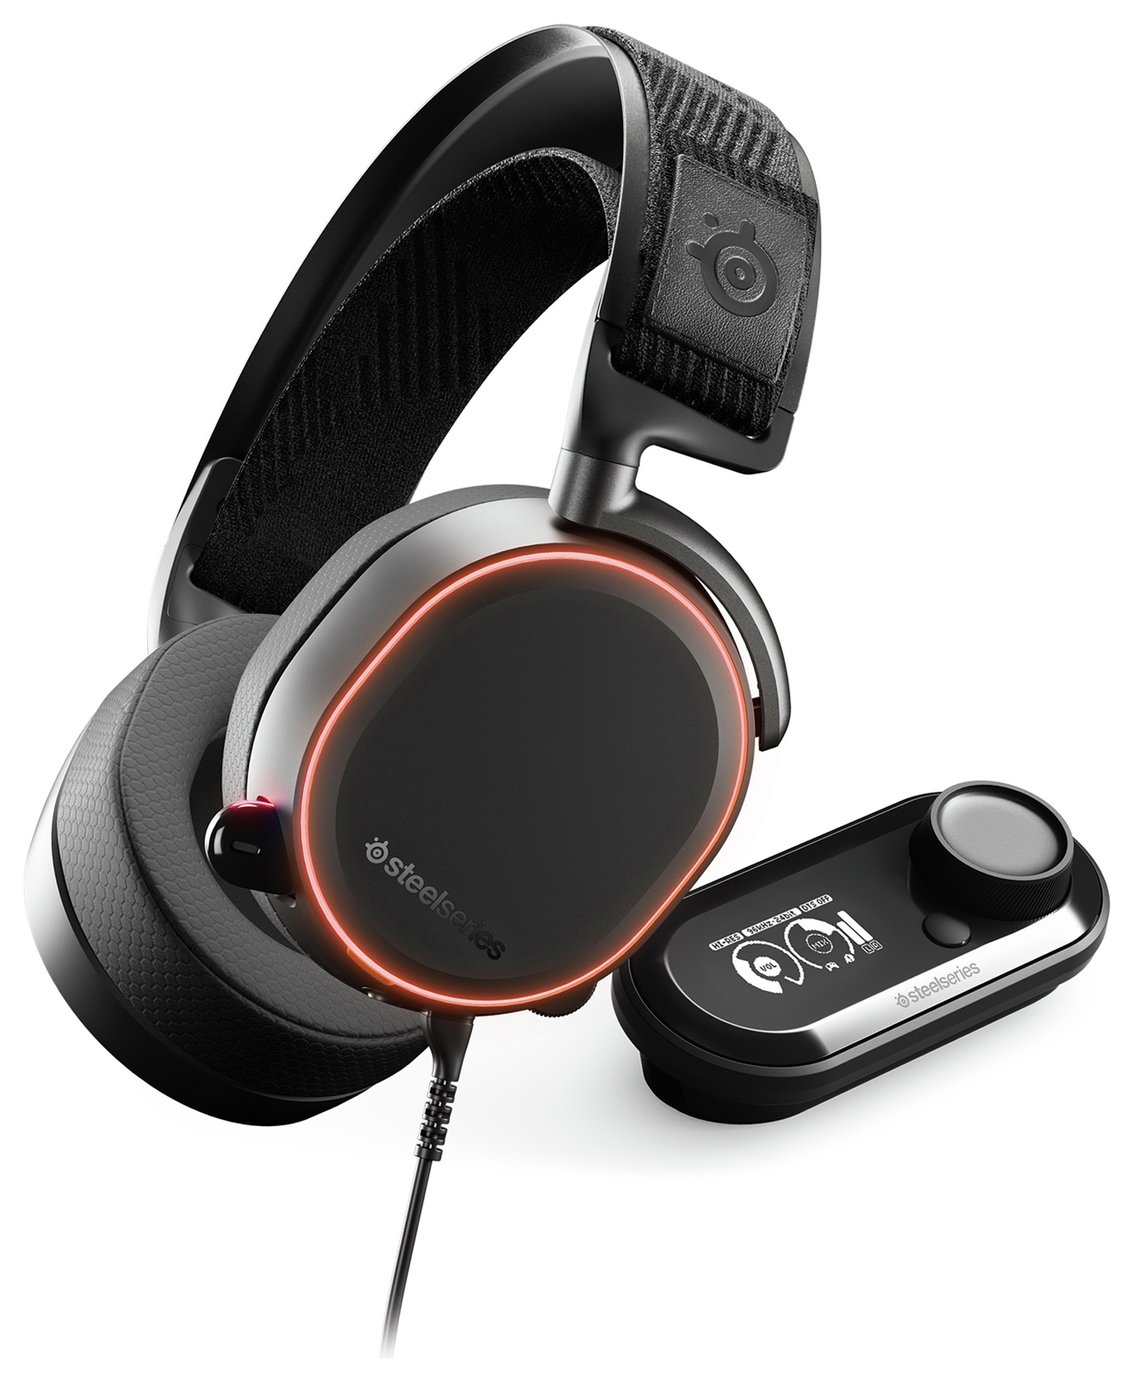 SteelSeries Arctis Pro Gamedac PS4, PC Headset Review